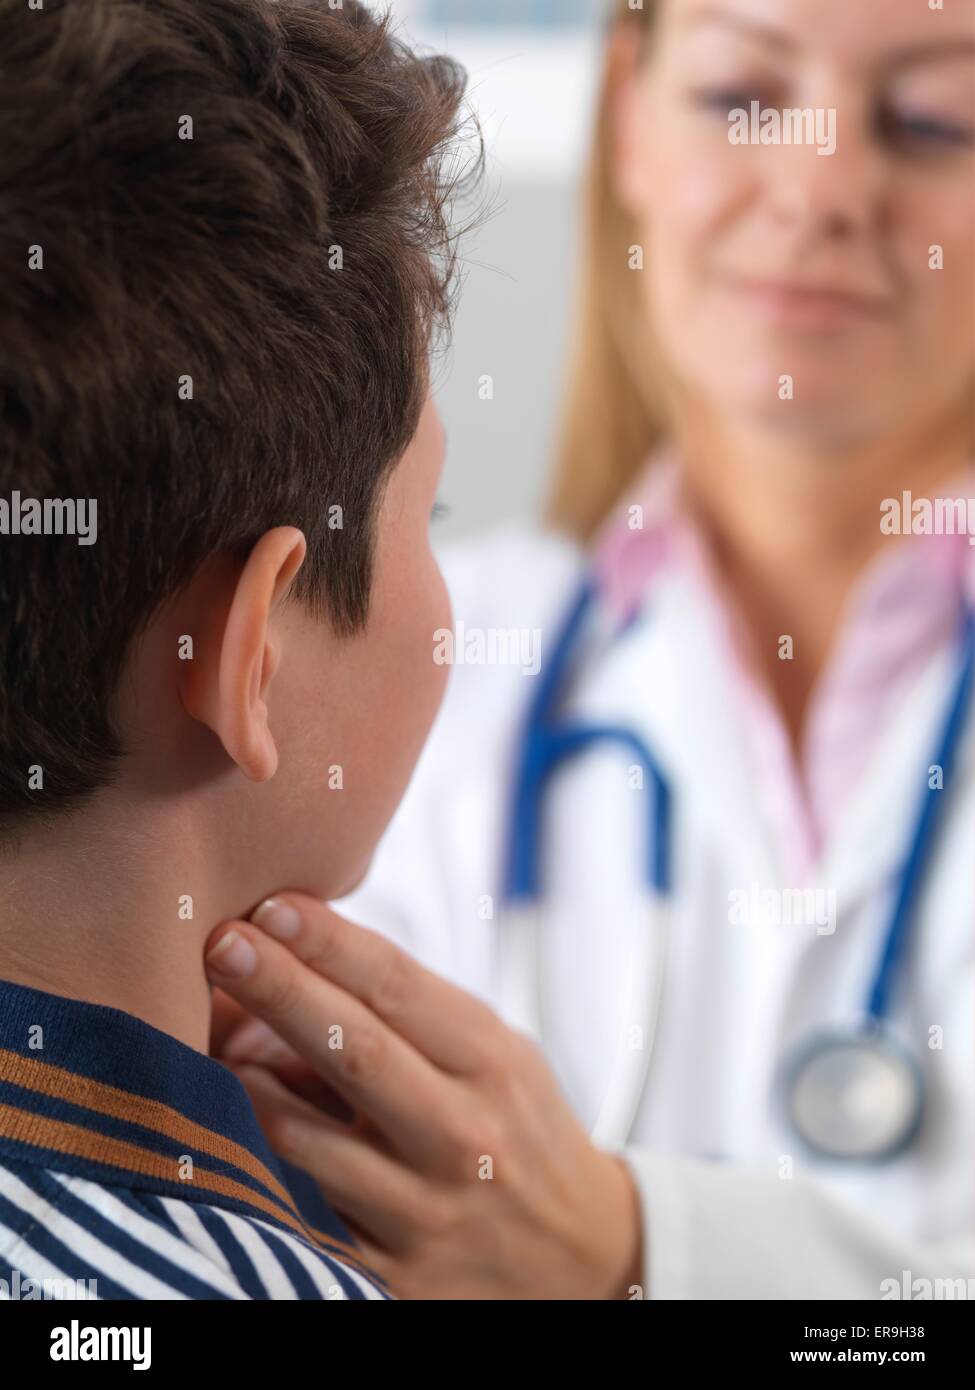 PROPERTY RELEASED. MODEL RELEASED. Doctor checking 10 year old boys glands as part of a medical examination. Stock Photo